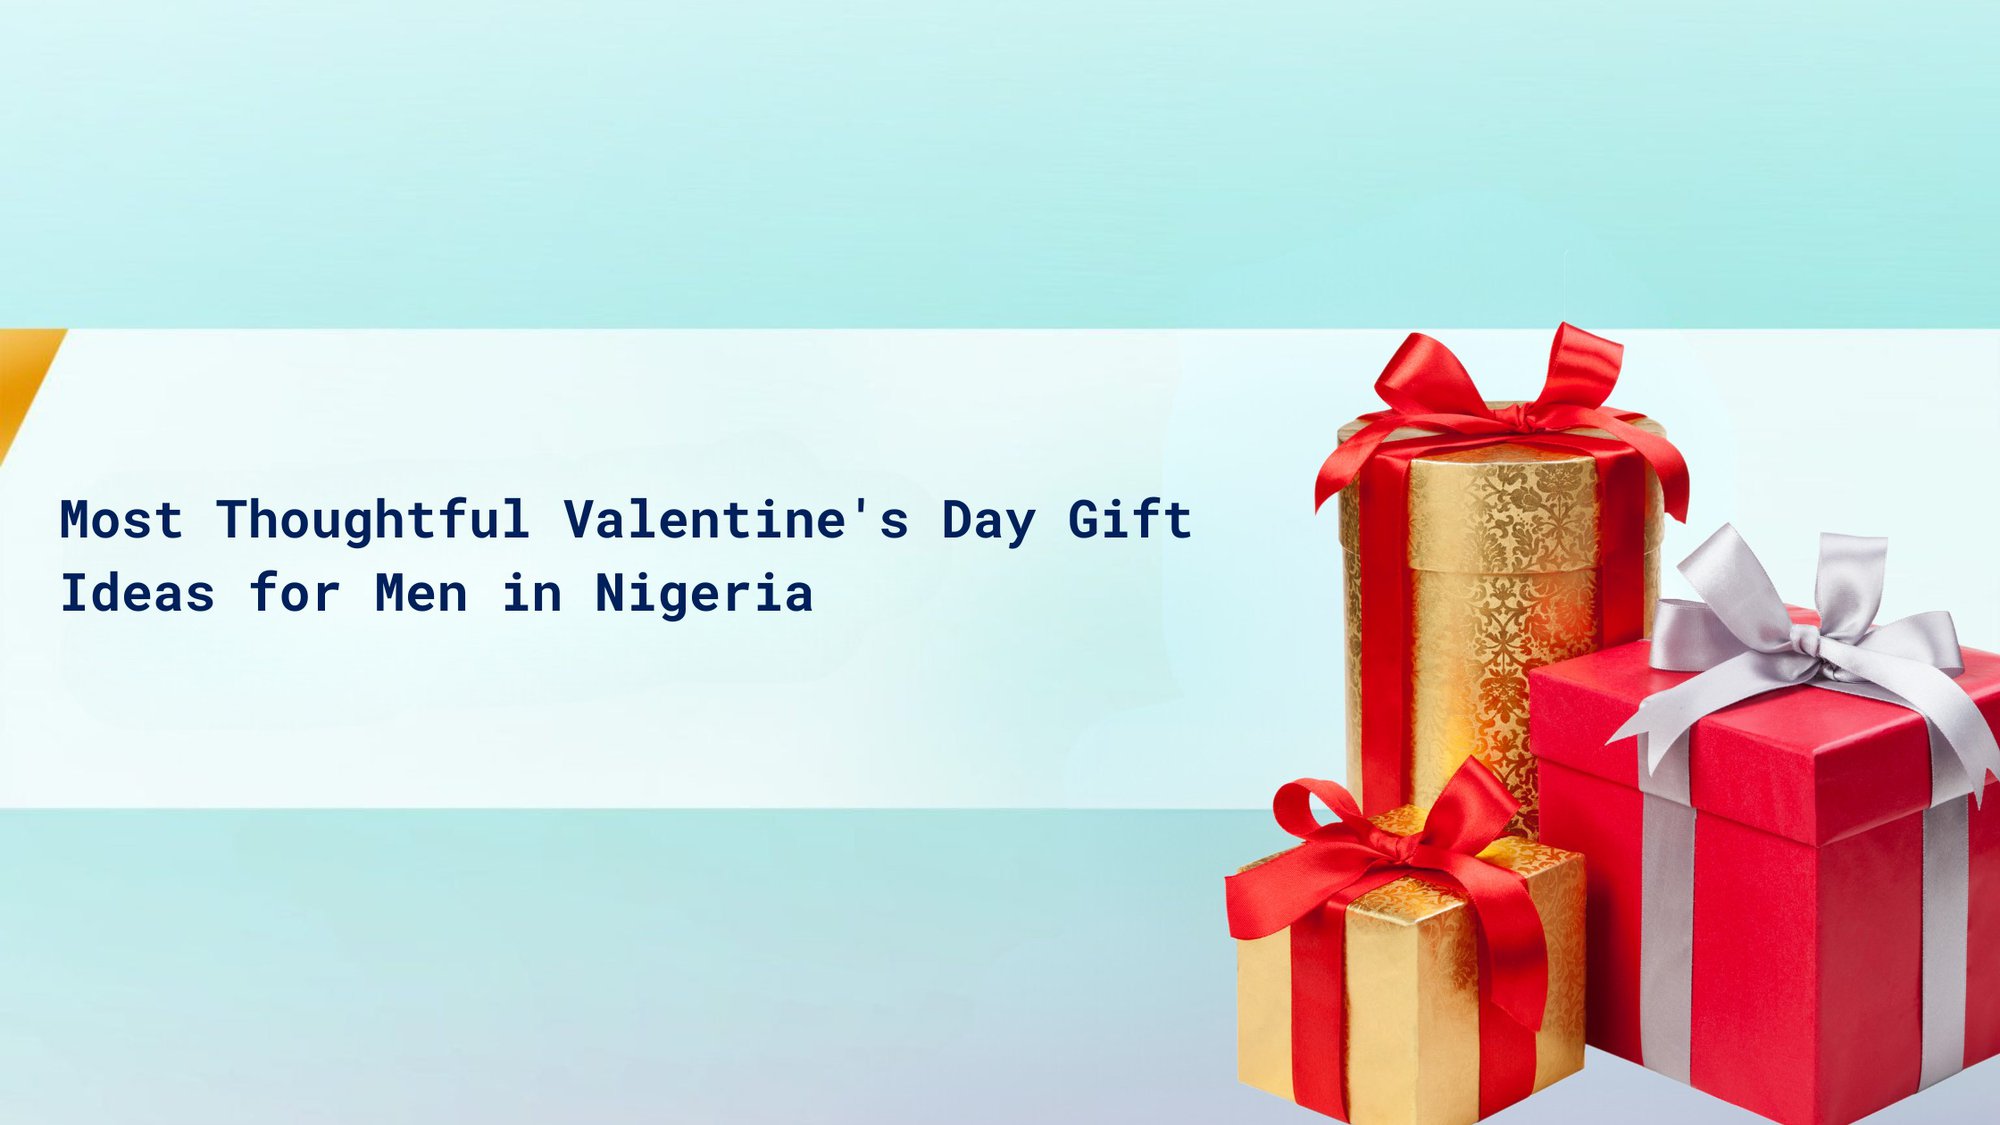 Most Thoughtful Valentine's Day Gift Ideas for Men in Nigeria cover